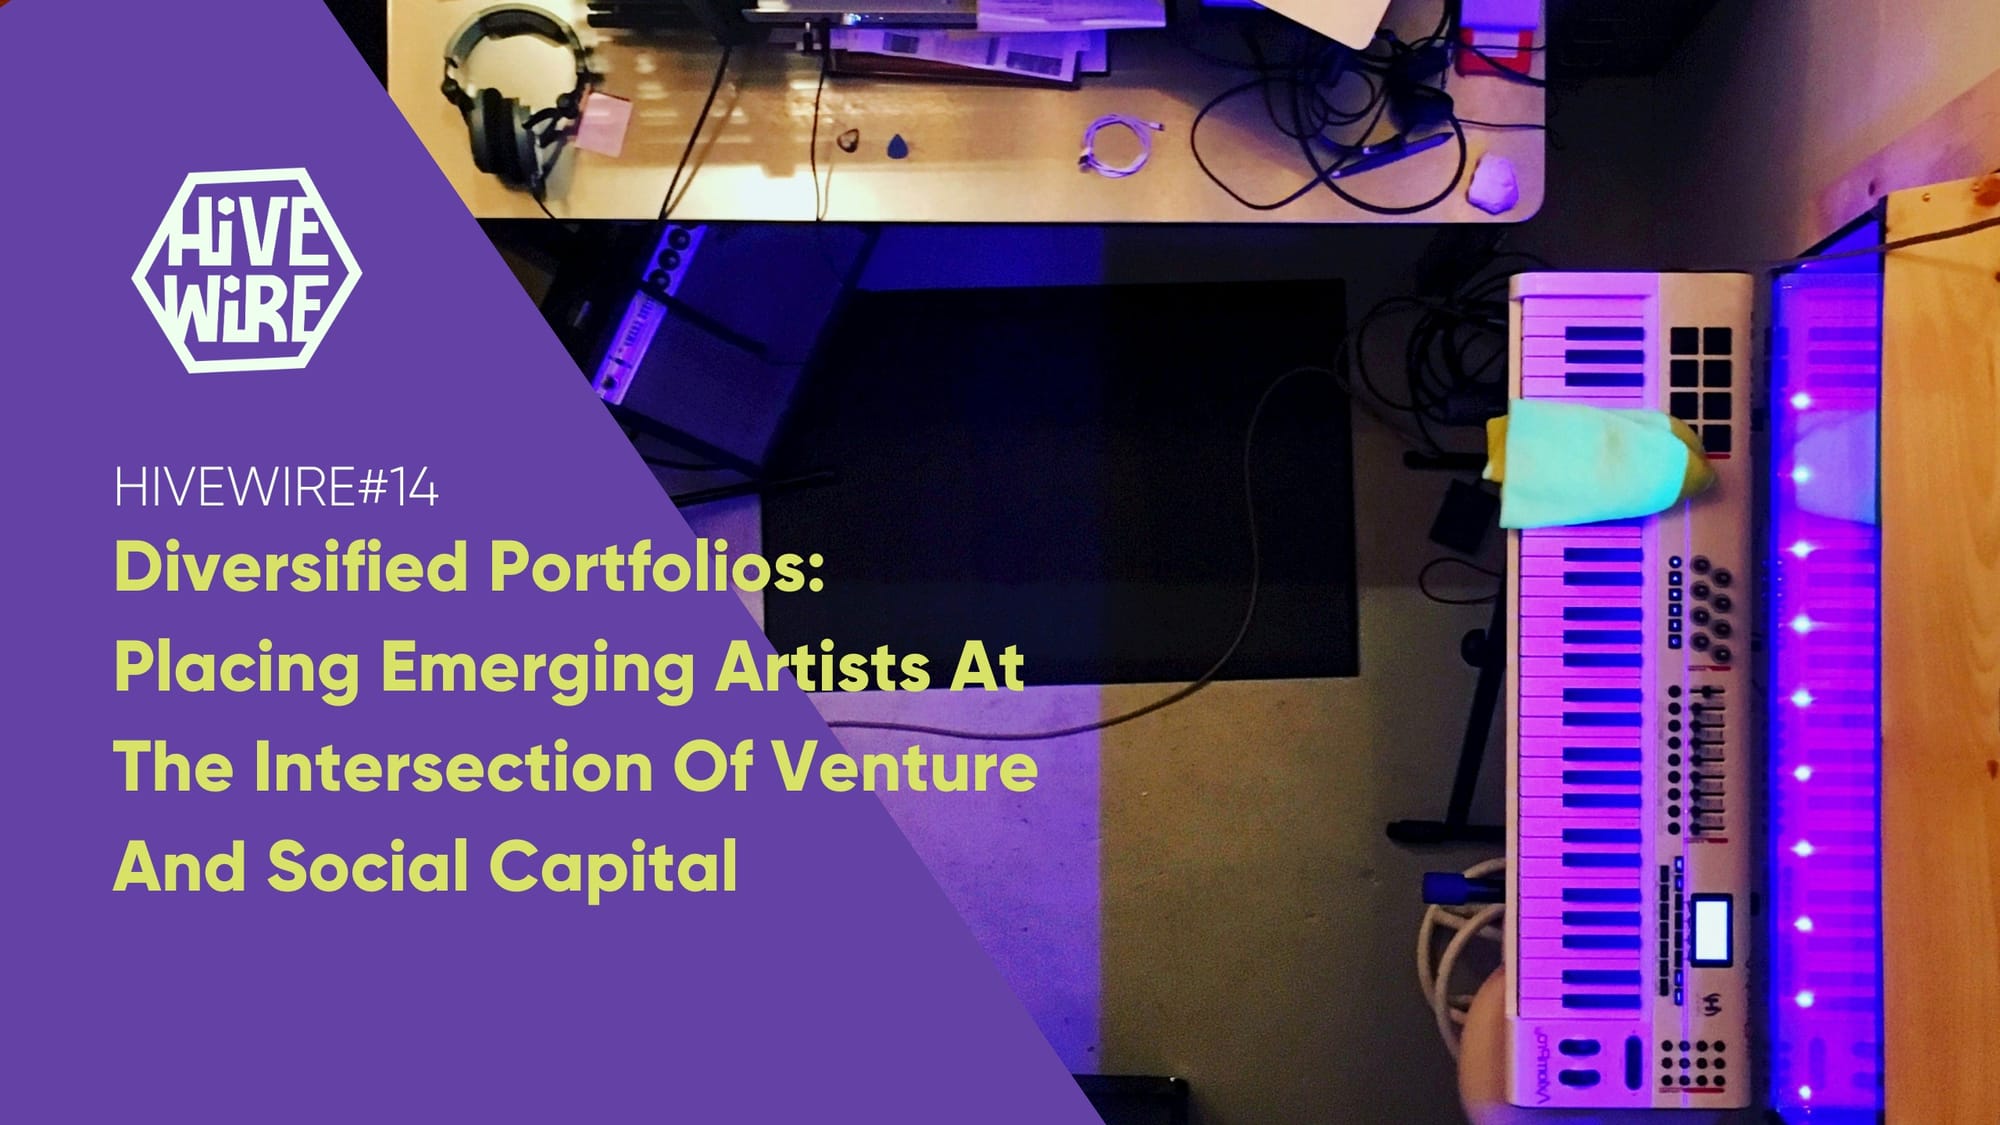 HIVEWIRE #14: Diversified Portfolios: Placing Emerging Artists At The Intersection Of Venture And Social Capital